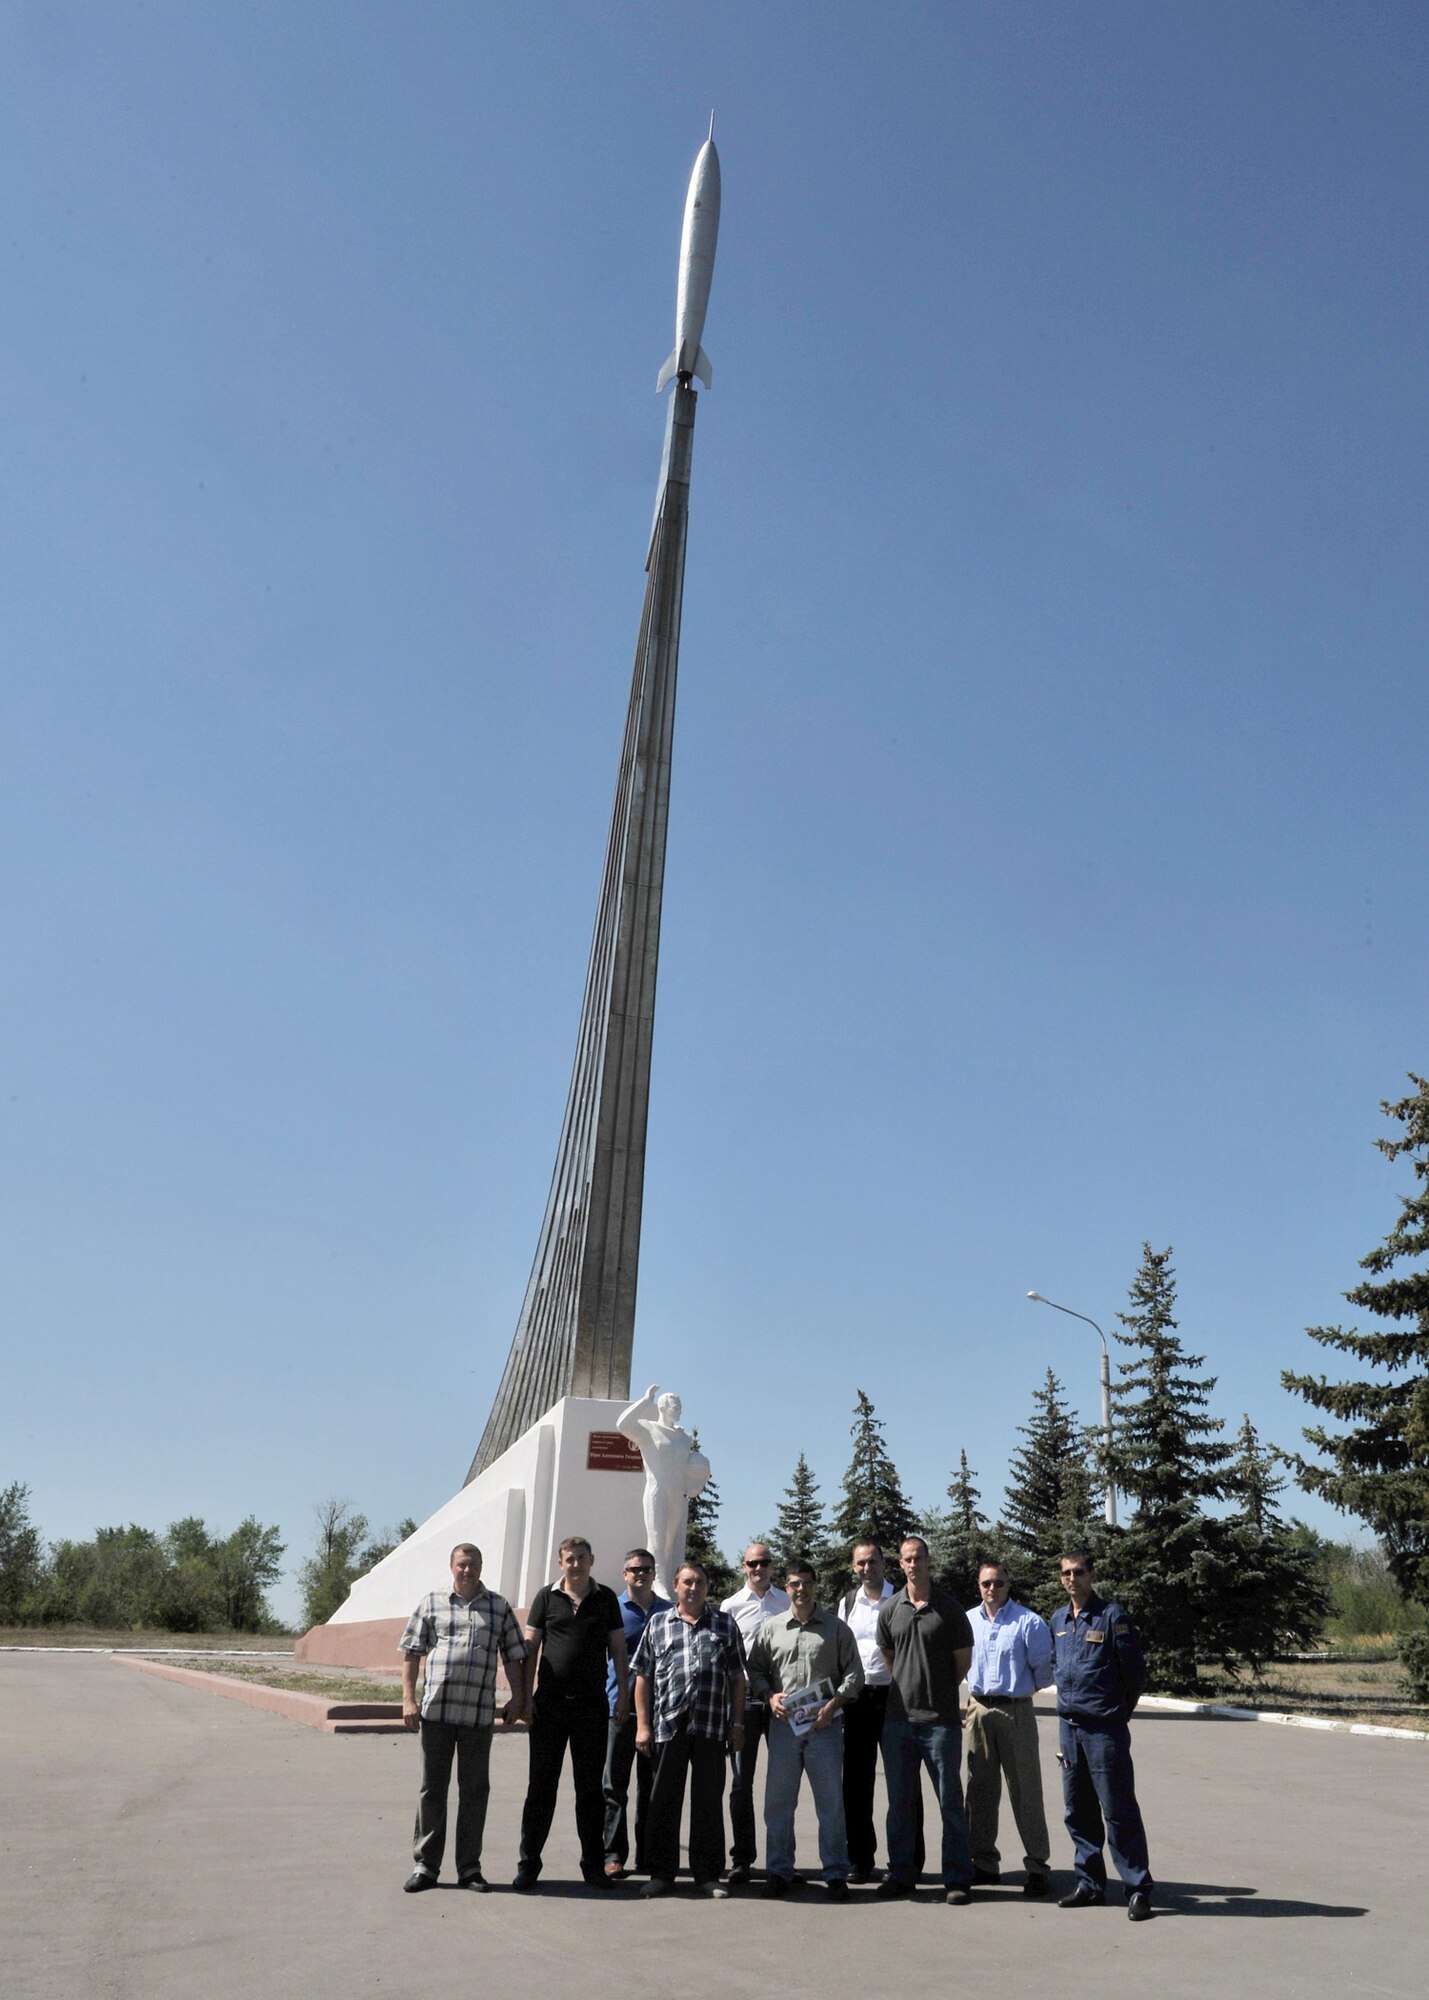 Barksdale Air Force Base members and Russian Federation air force personnel stand in front of a monument outside of Engels, Russia, July 26. The monument is where Cosmonaut Yuri Gagarin, the first person in space, landed a Russian space capsule. Col. Andrew Gebara, 2nd Bomb Wing commander, and a team of experts visited the monument and other cultural sites in conjunction with an airfield site survey. (Courtesy photo)